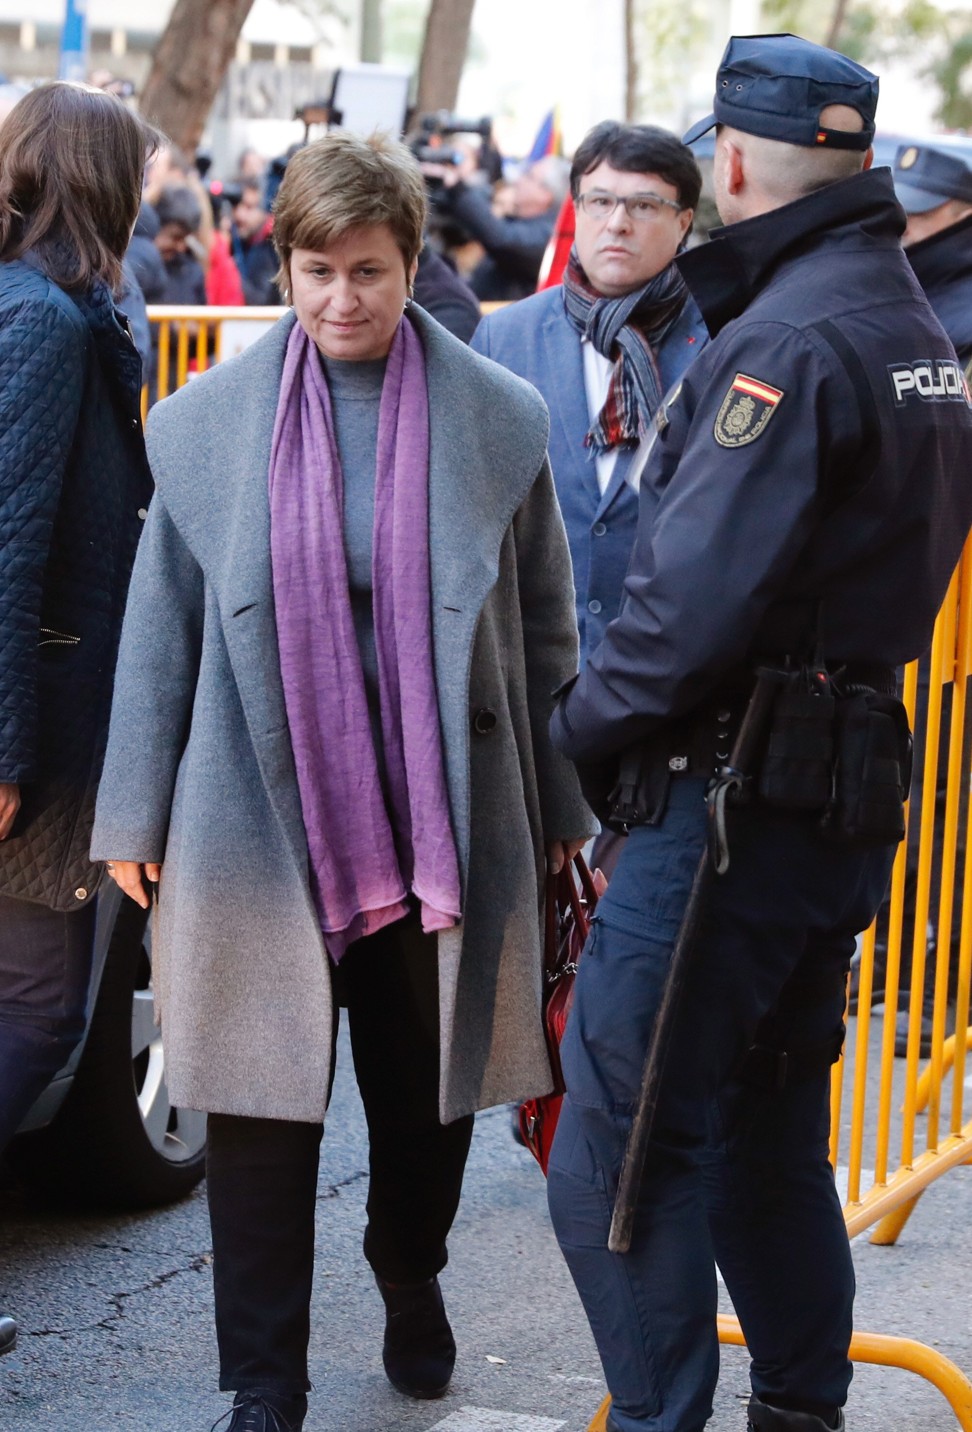 Catalan regional MP Anna Simo (L) arrives at the Supreme Court in Madrid, Spain. Photo: EPA-EFE